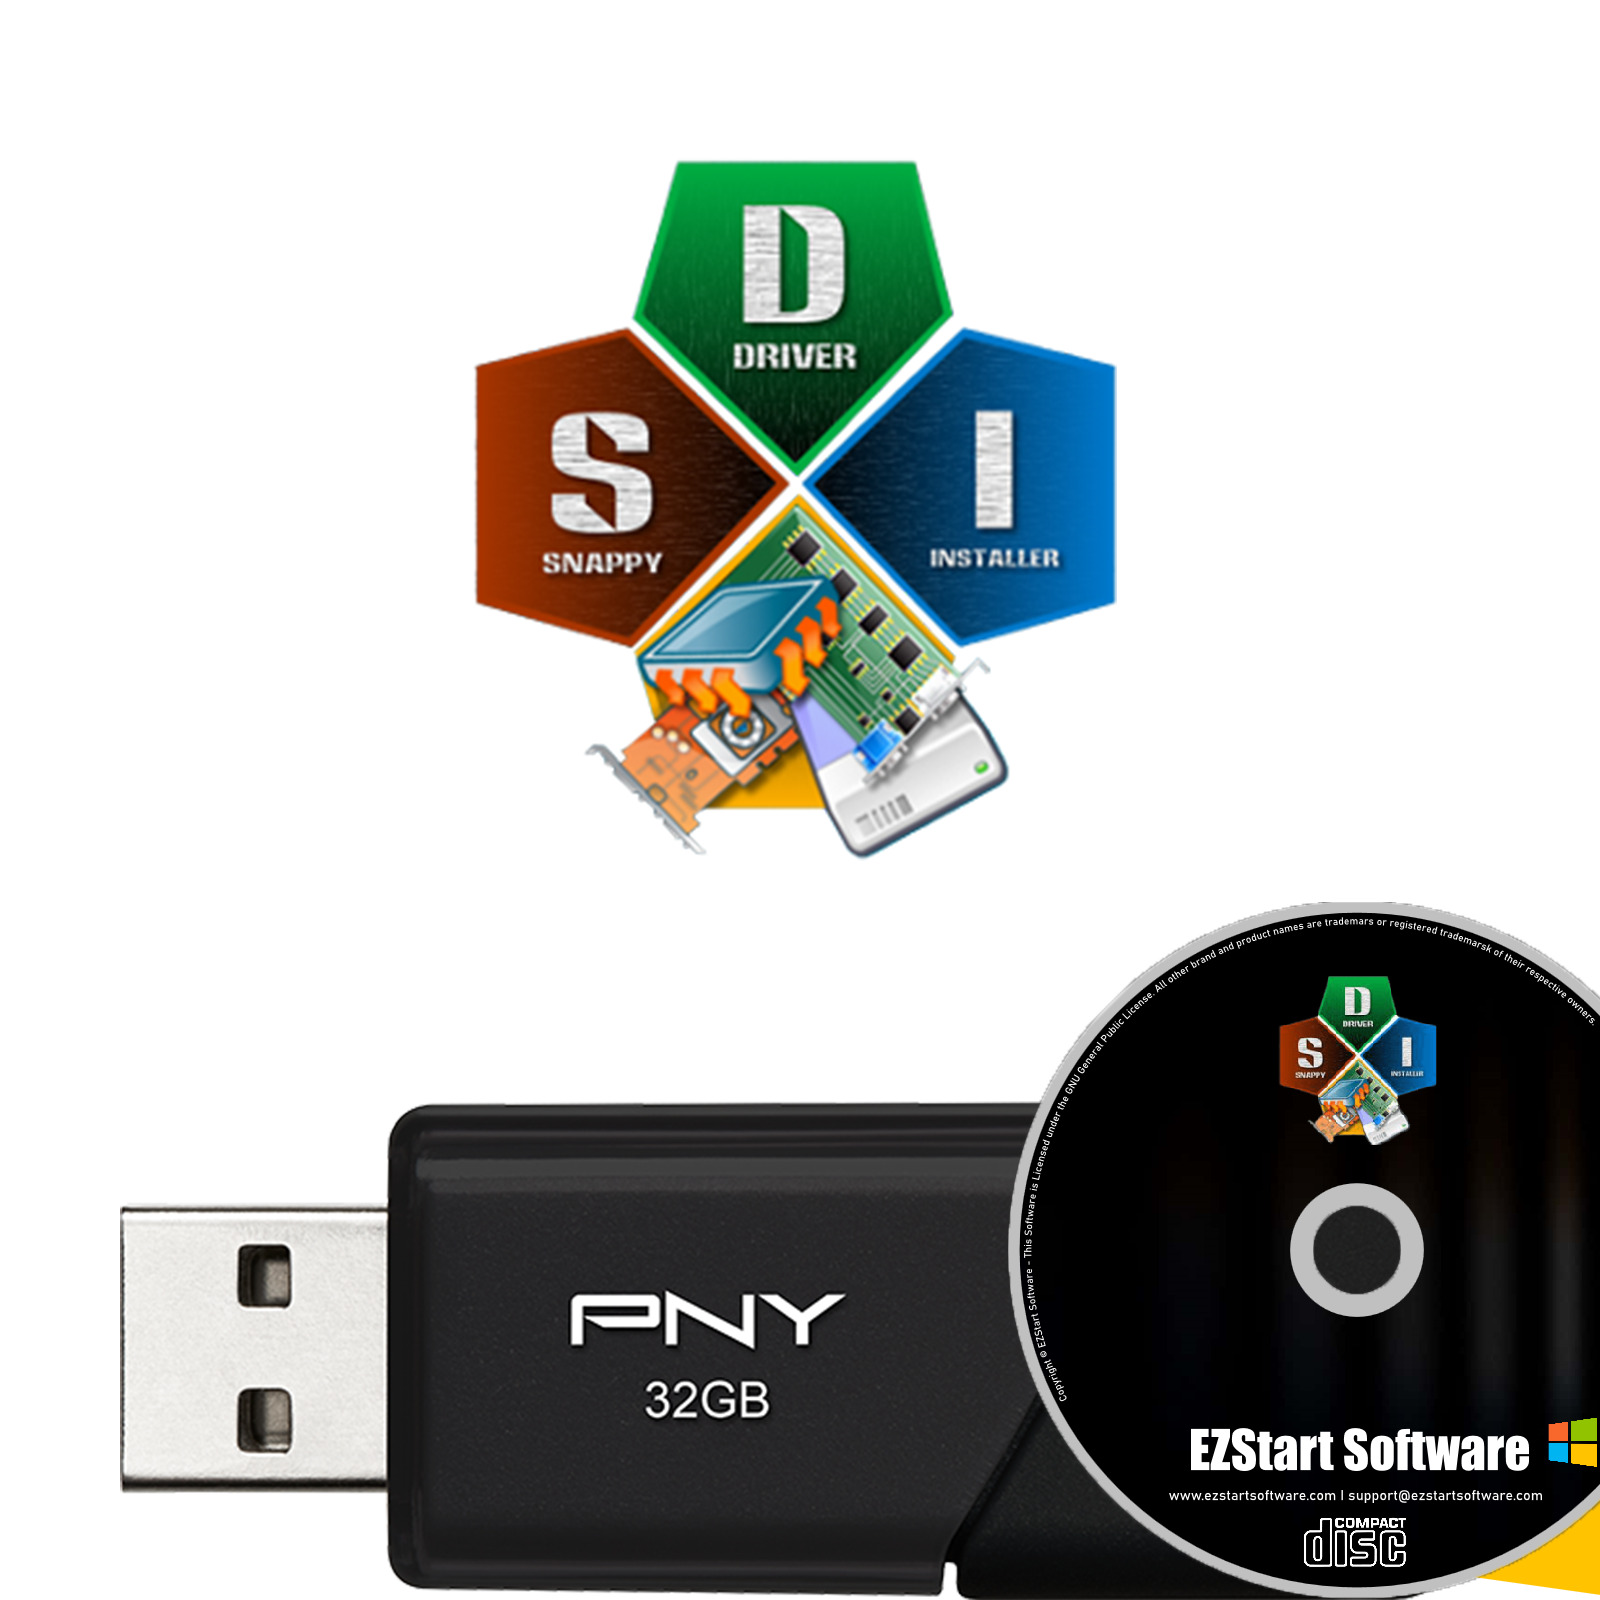 Snappy Driver Installer - Install & Update Drivers on CD/USB